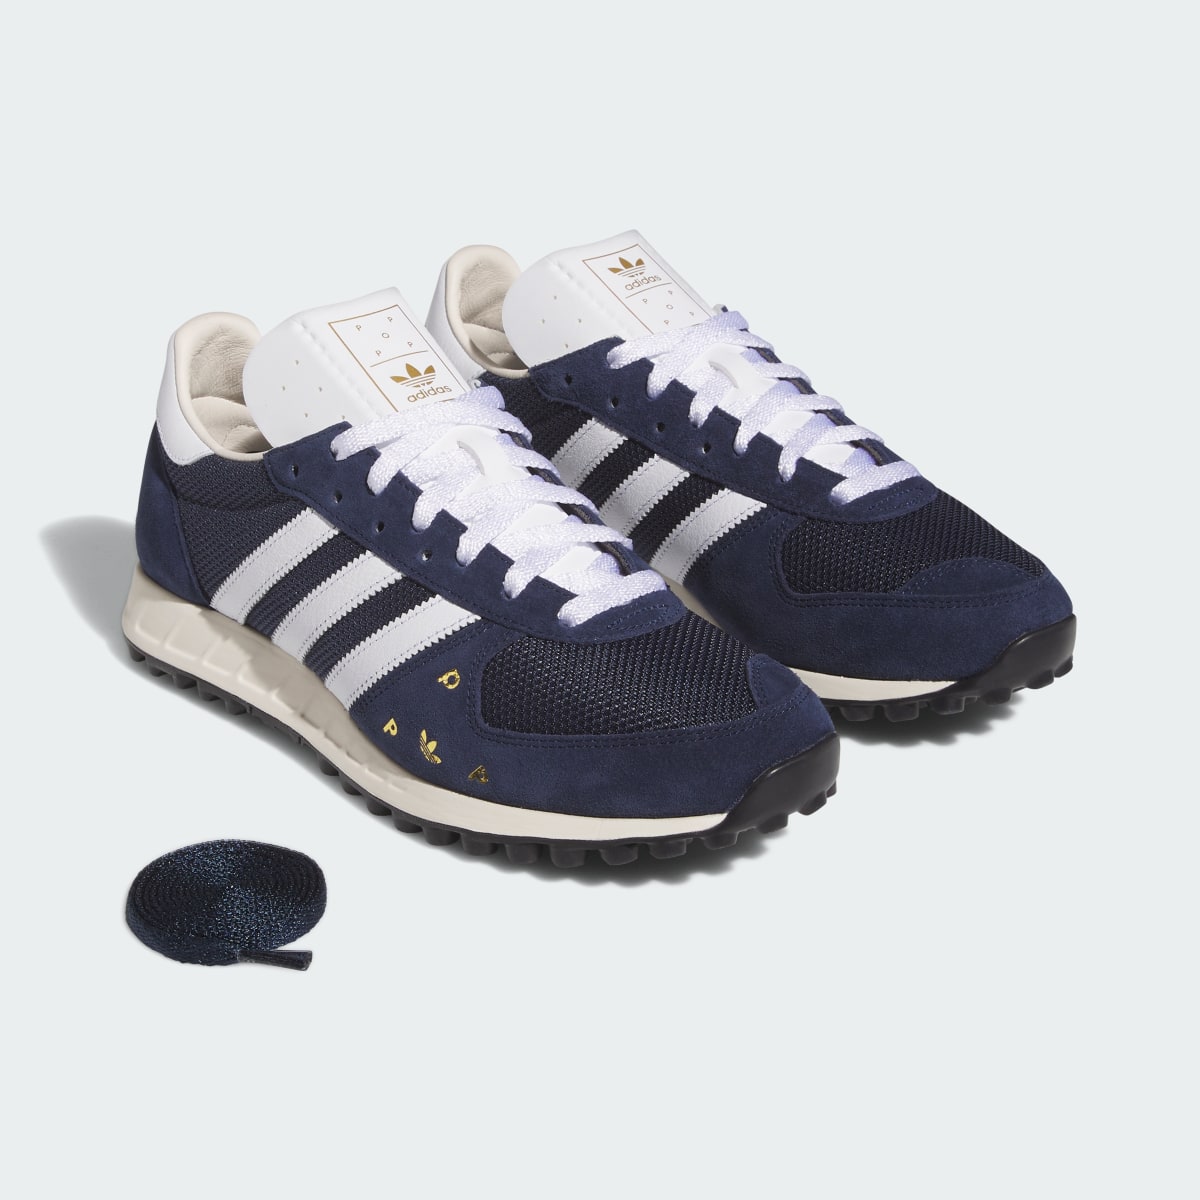 Adidas Pop Trading Co TRX Trainers. 10